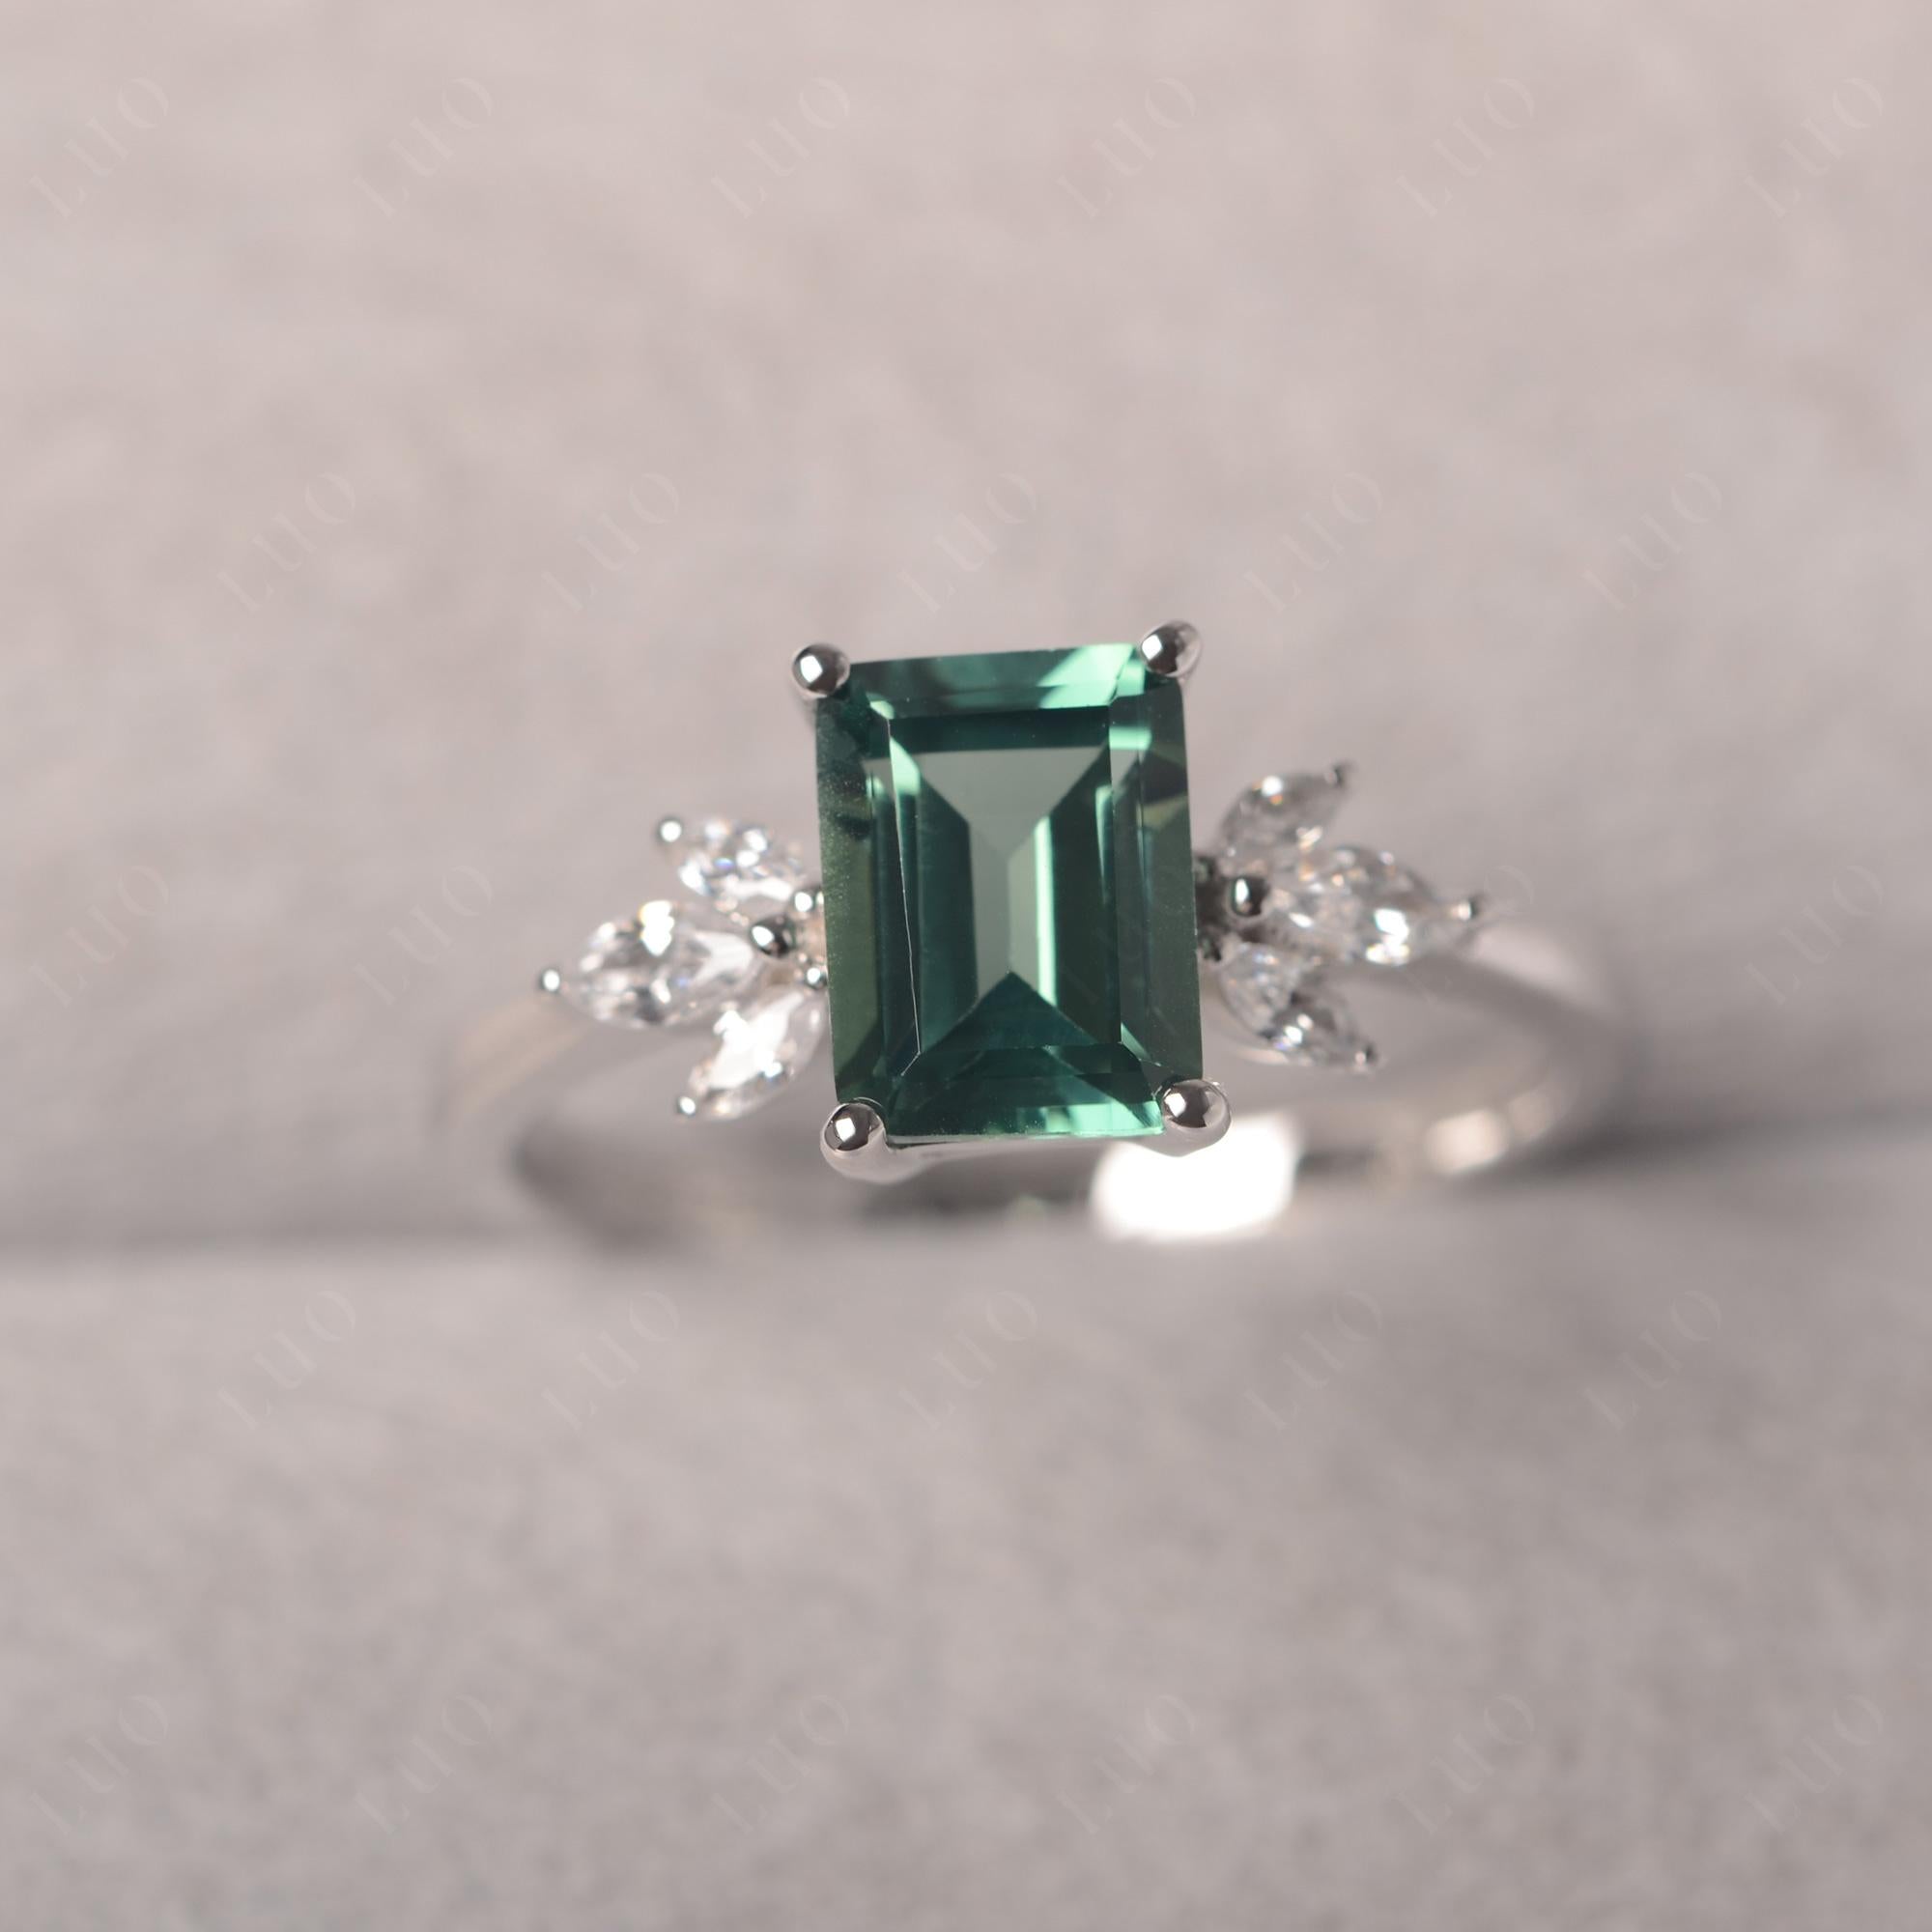 Lab Green Sapphire Ring Emerald Cut Wedding Ring - LUO Jewelry